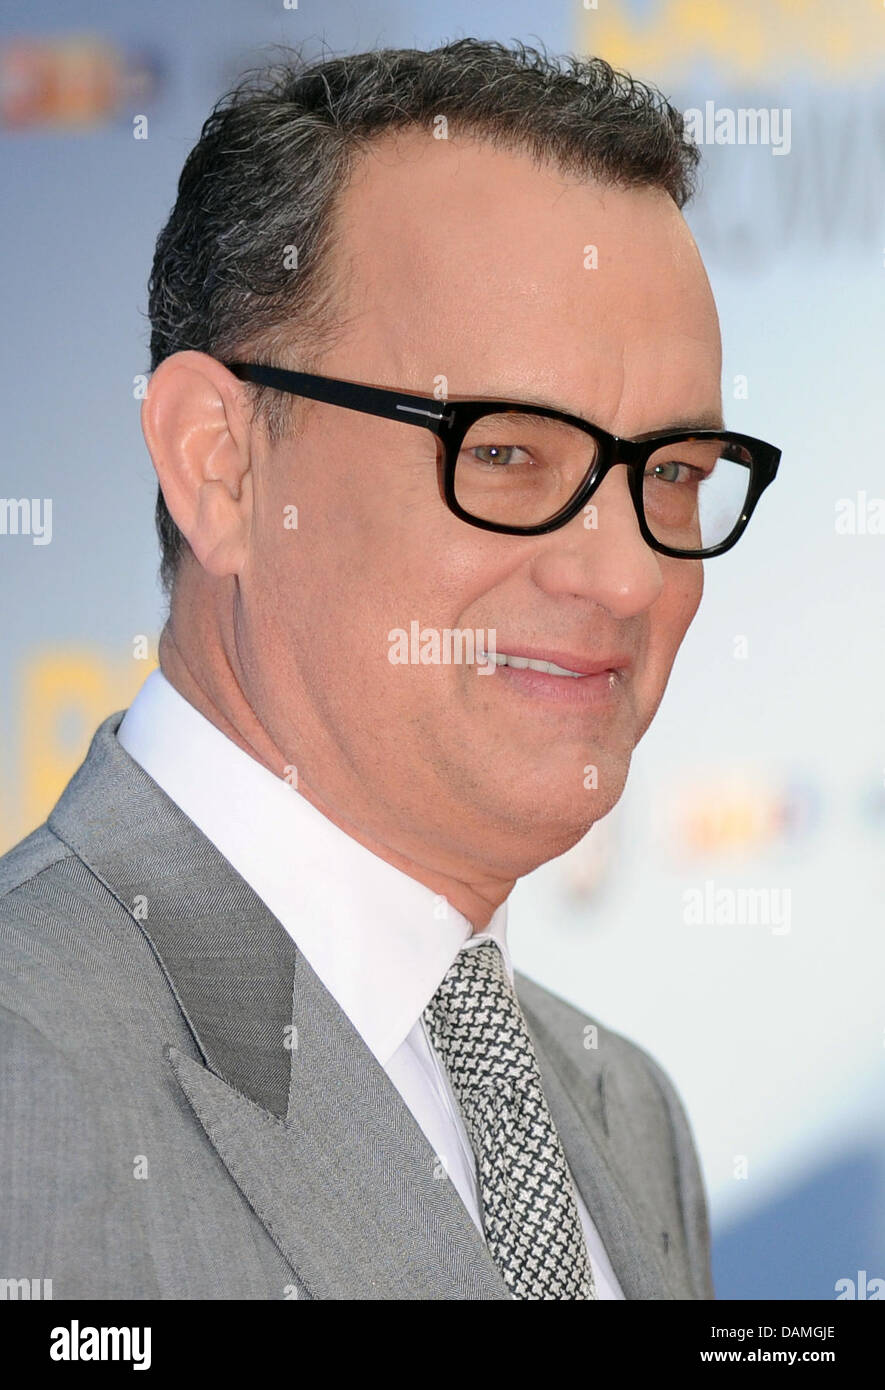 US actor Tom Hanks arrives for the premiere of the film 'Larry Crowne' at  the Cinestar movie theatre at Potsdamer Platz in Berlin, Germany, 12 June  2011. Photo: Jens Kalaene Stock Photo - Alamy